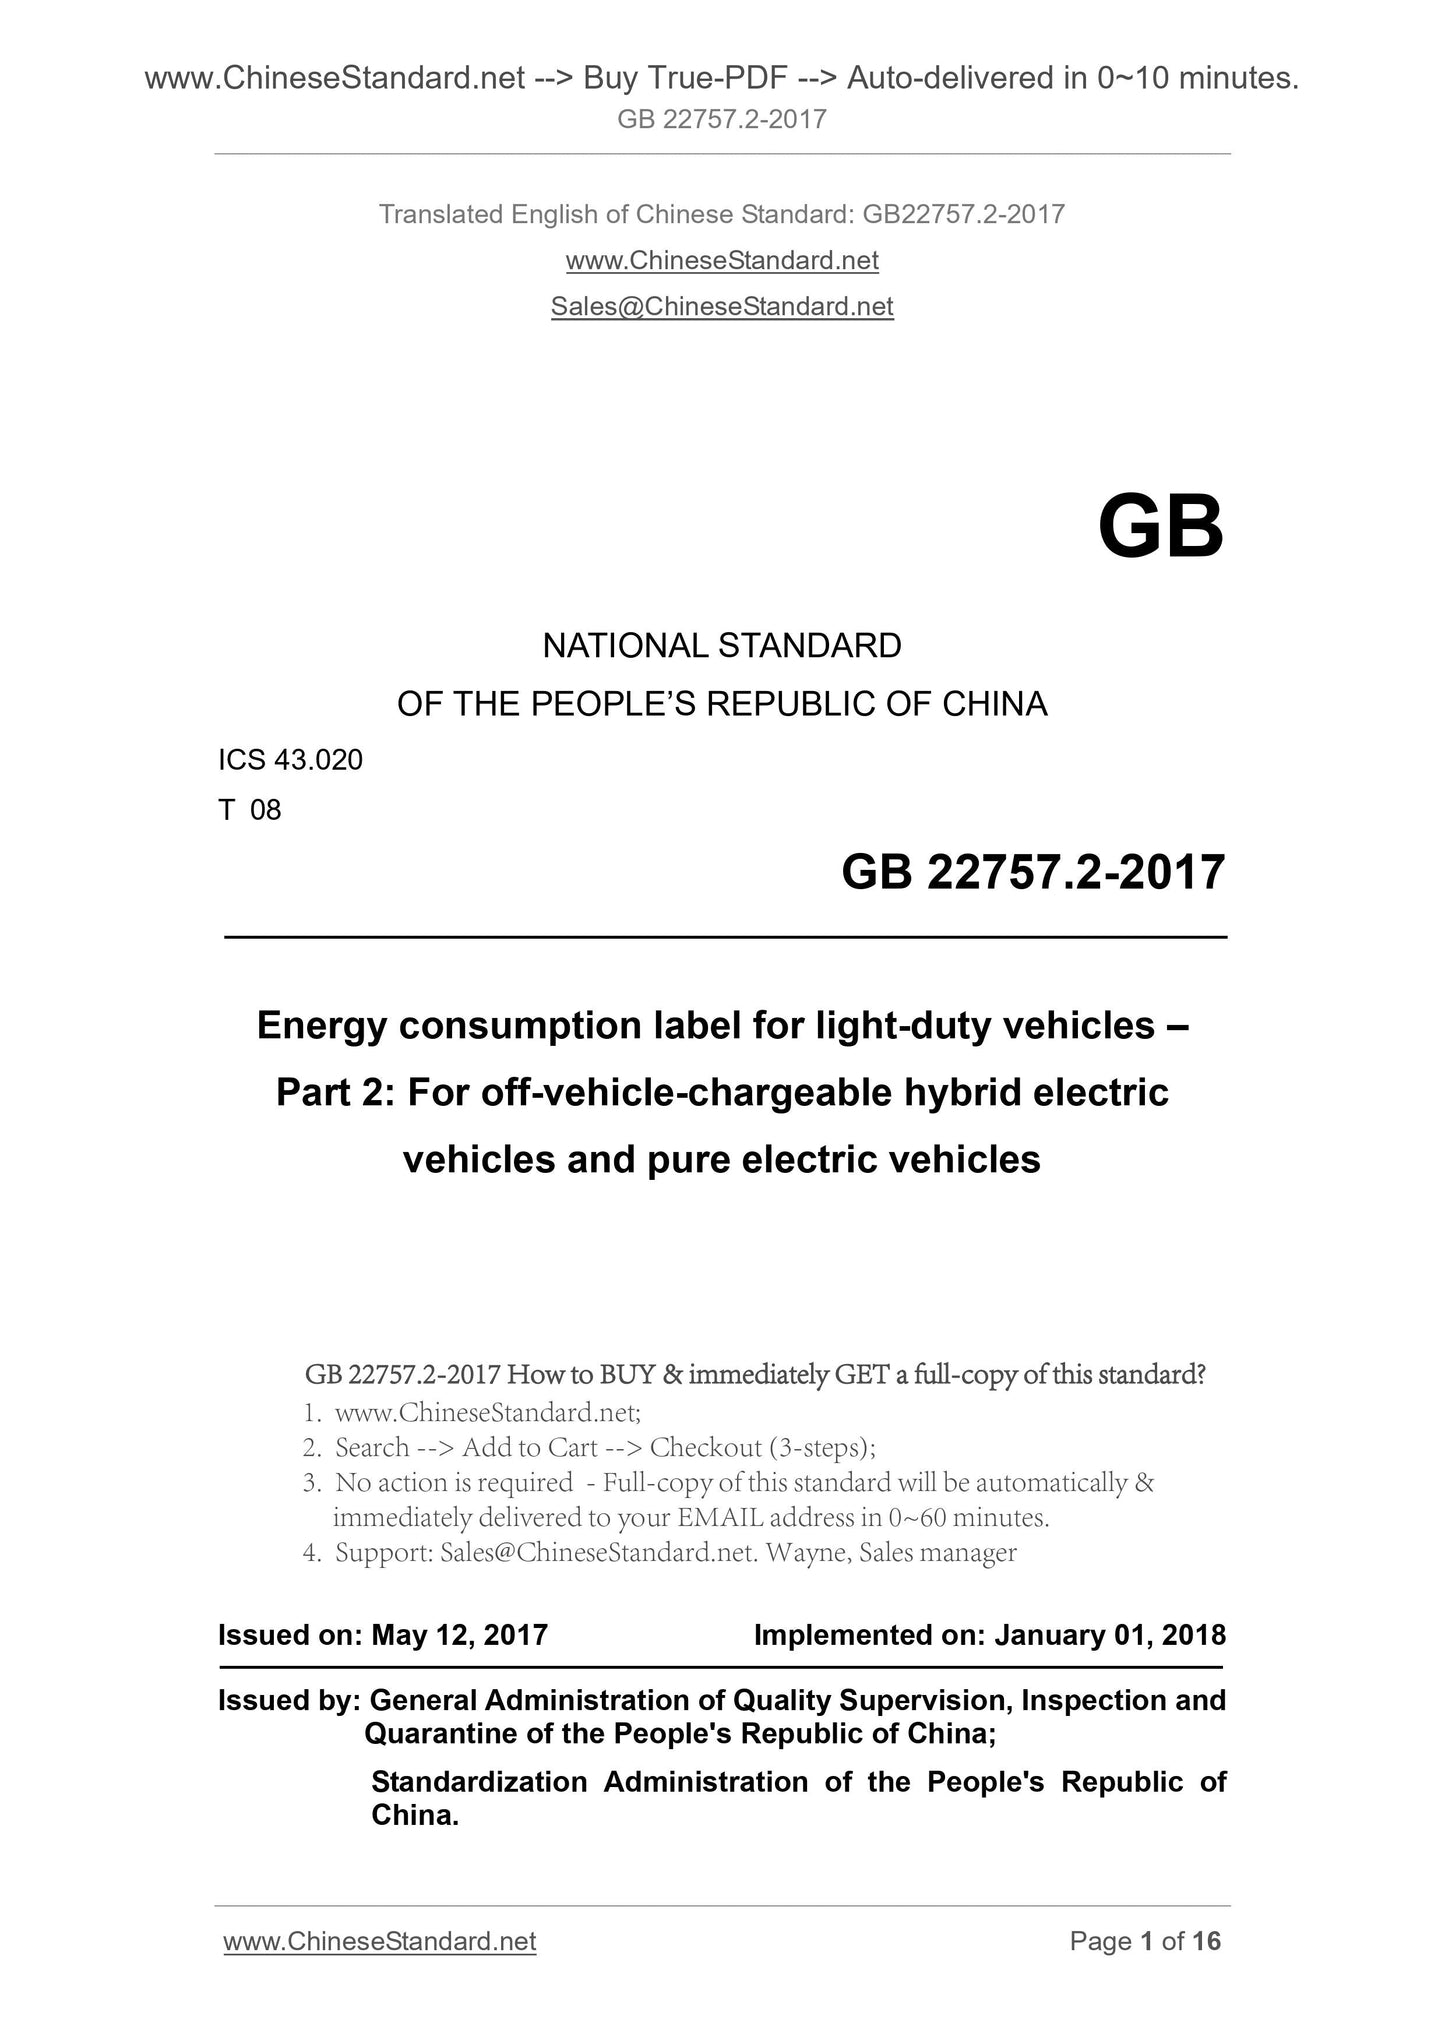 GB 22757.2-2017 Page 1